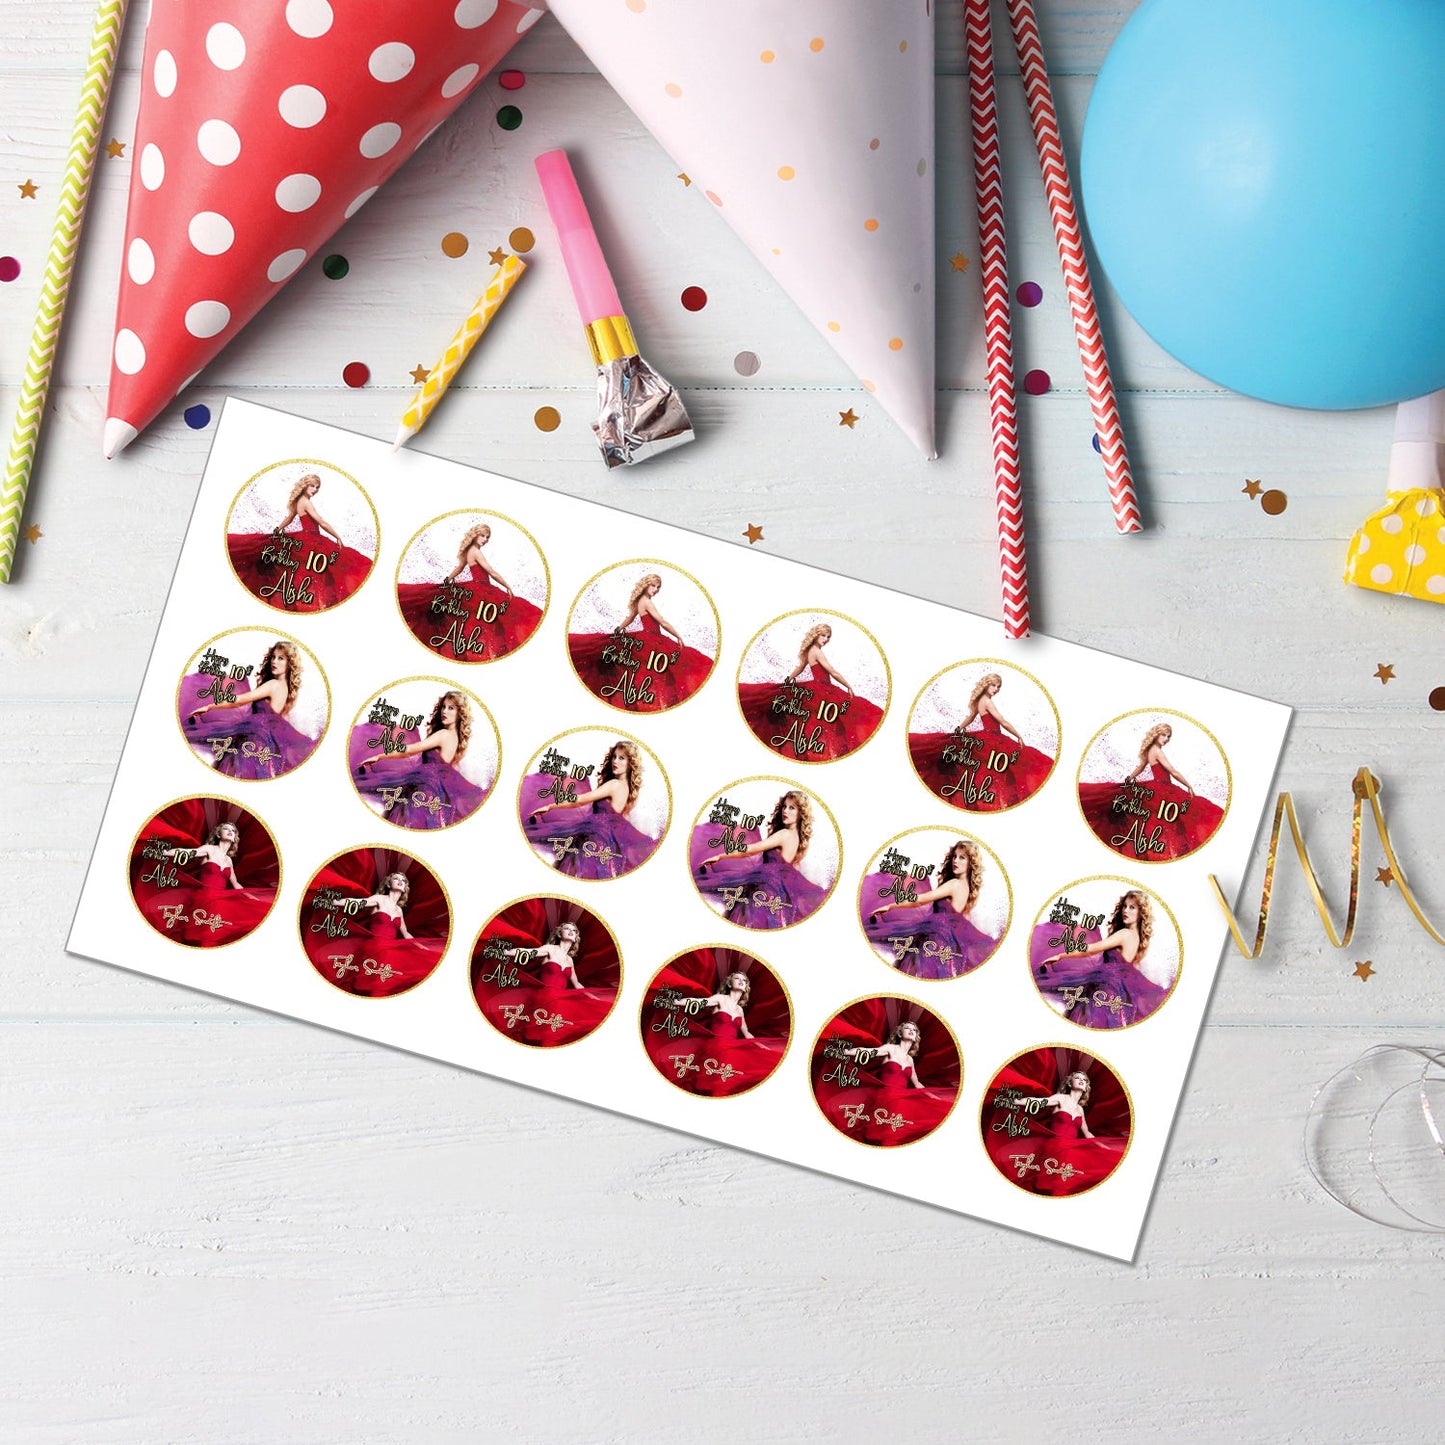 Taylor Swift Personalized Cupcakes Toppers - A Sweet Addition to Your Party